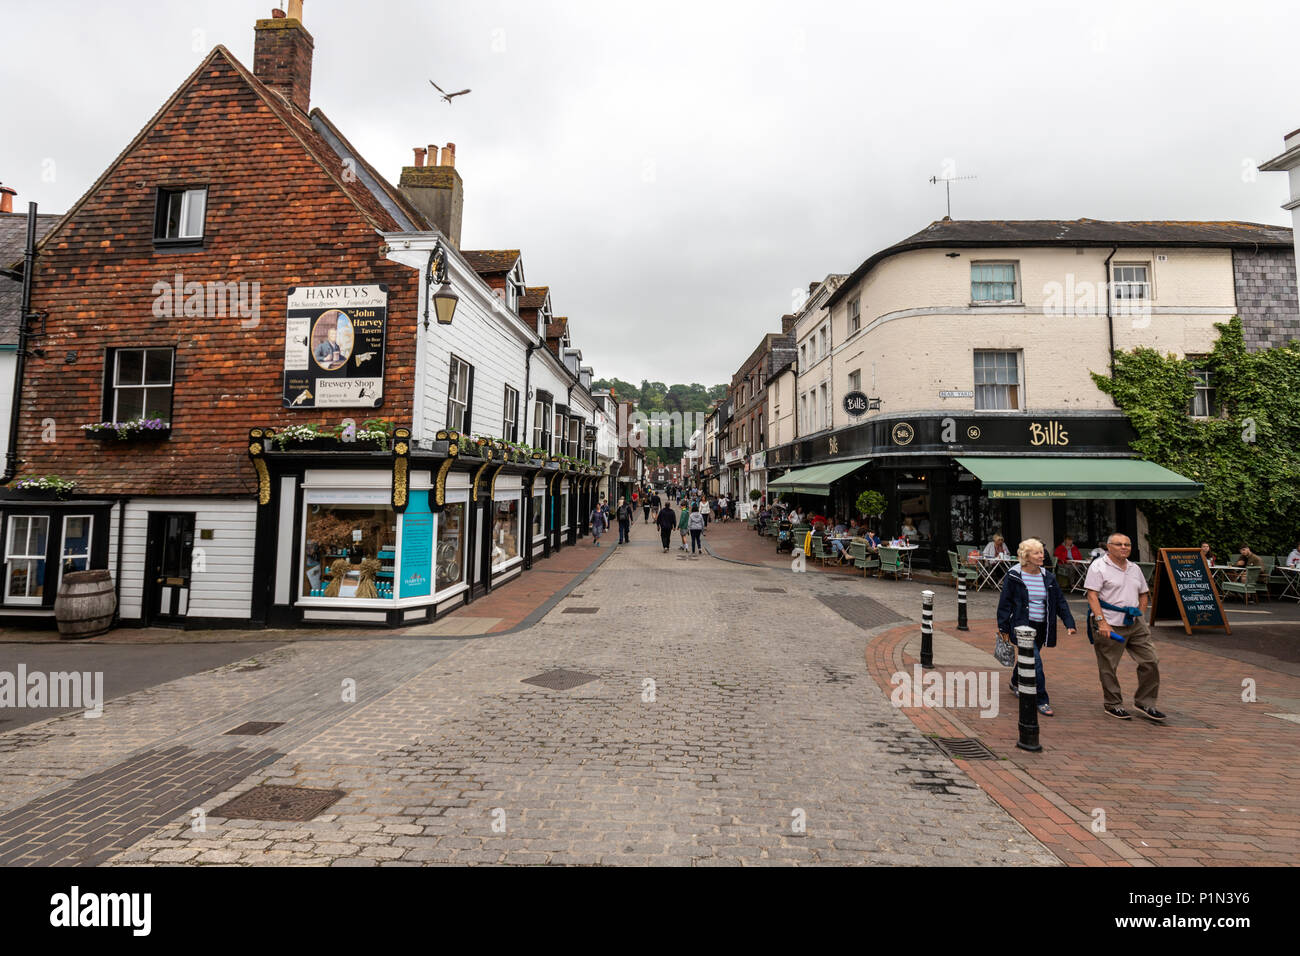 Cliffe High Street, a lovely shopping and browsing street, Lewes, East Sussex, England, UK Stock Photo